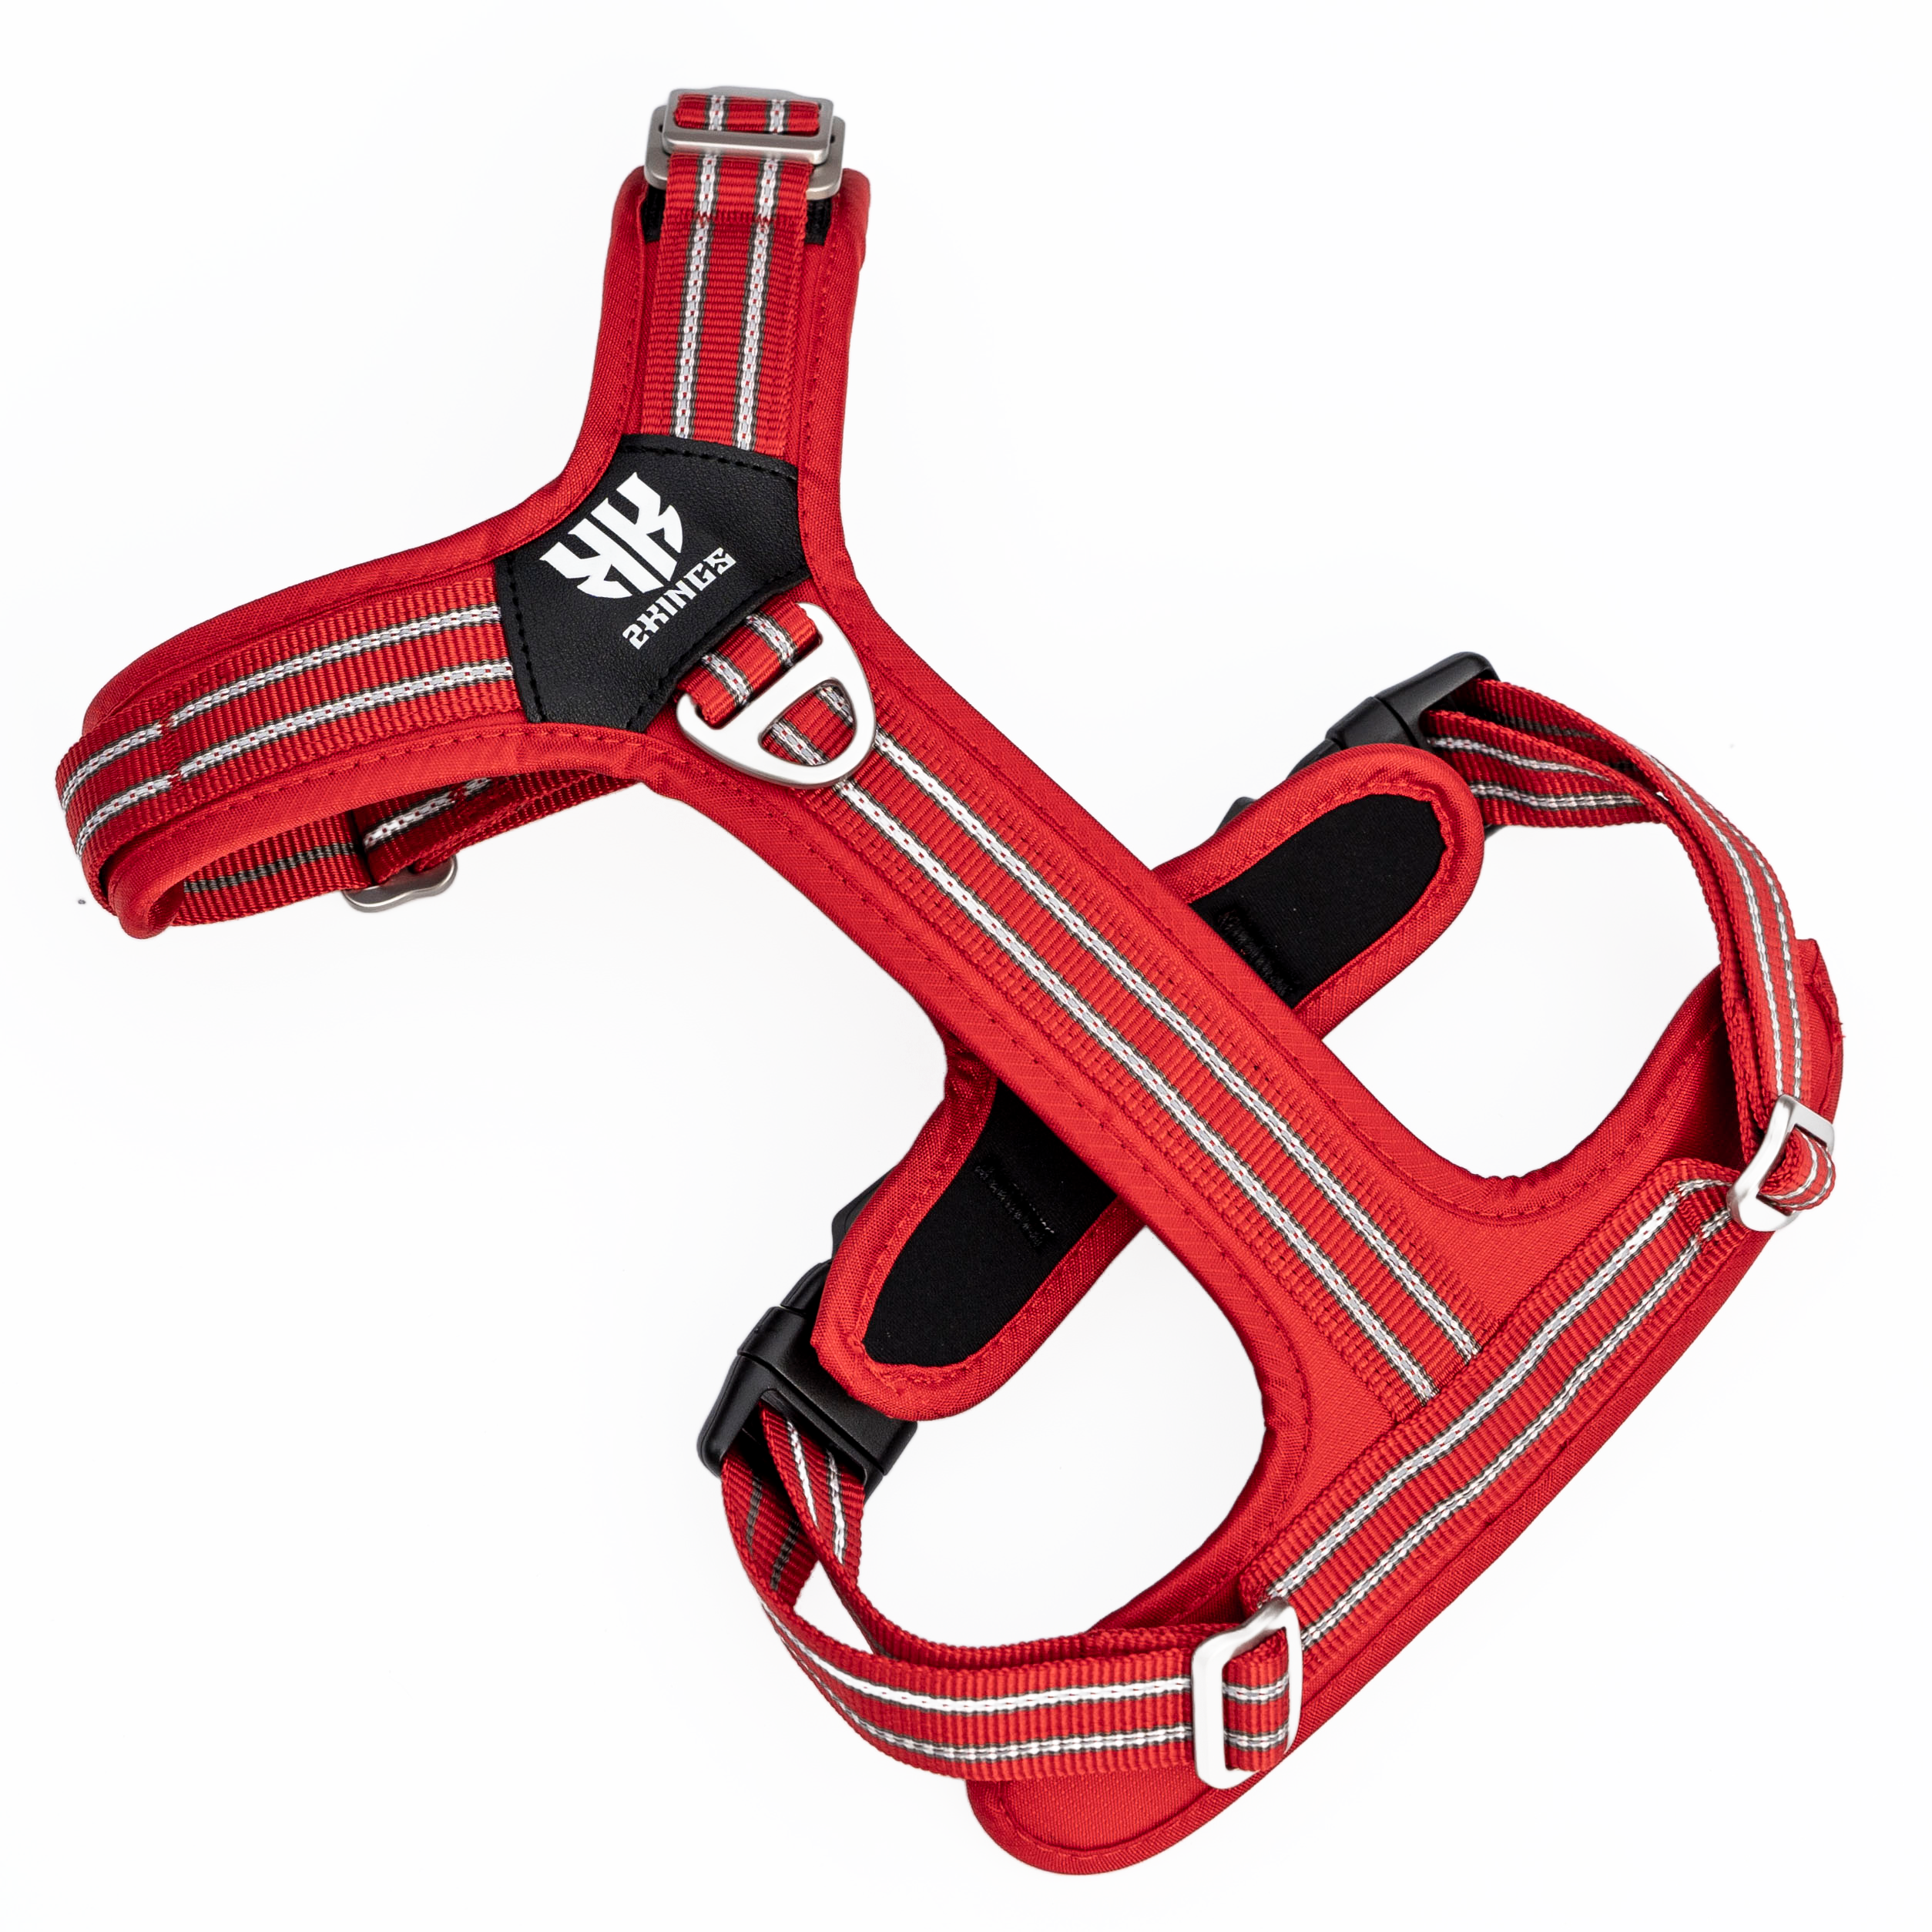 Adjustable Dog Harness with Double-Handed Lead Set - Lightweight & Reflective - Red.